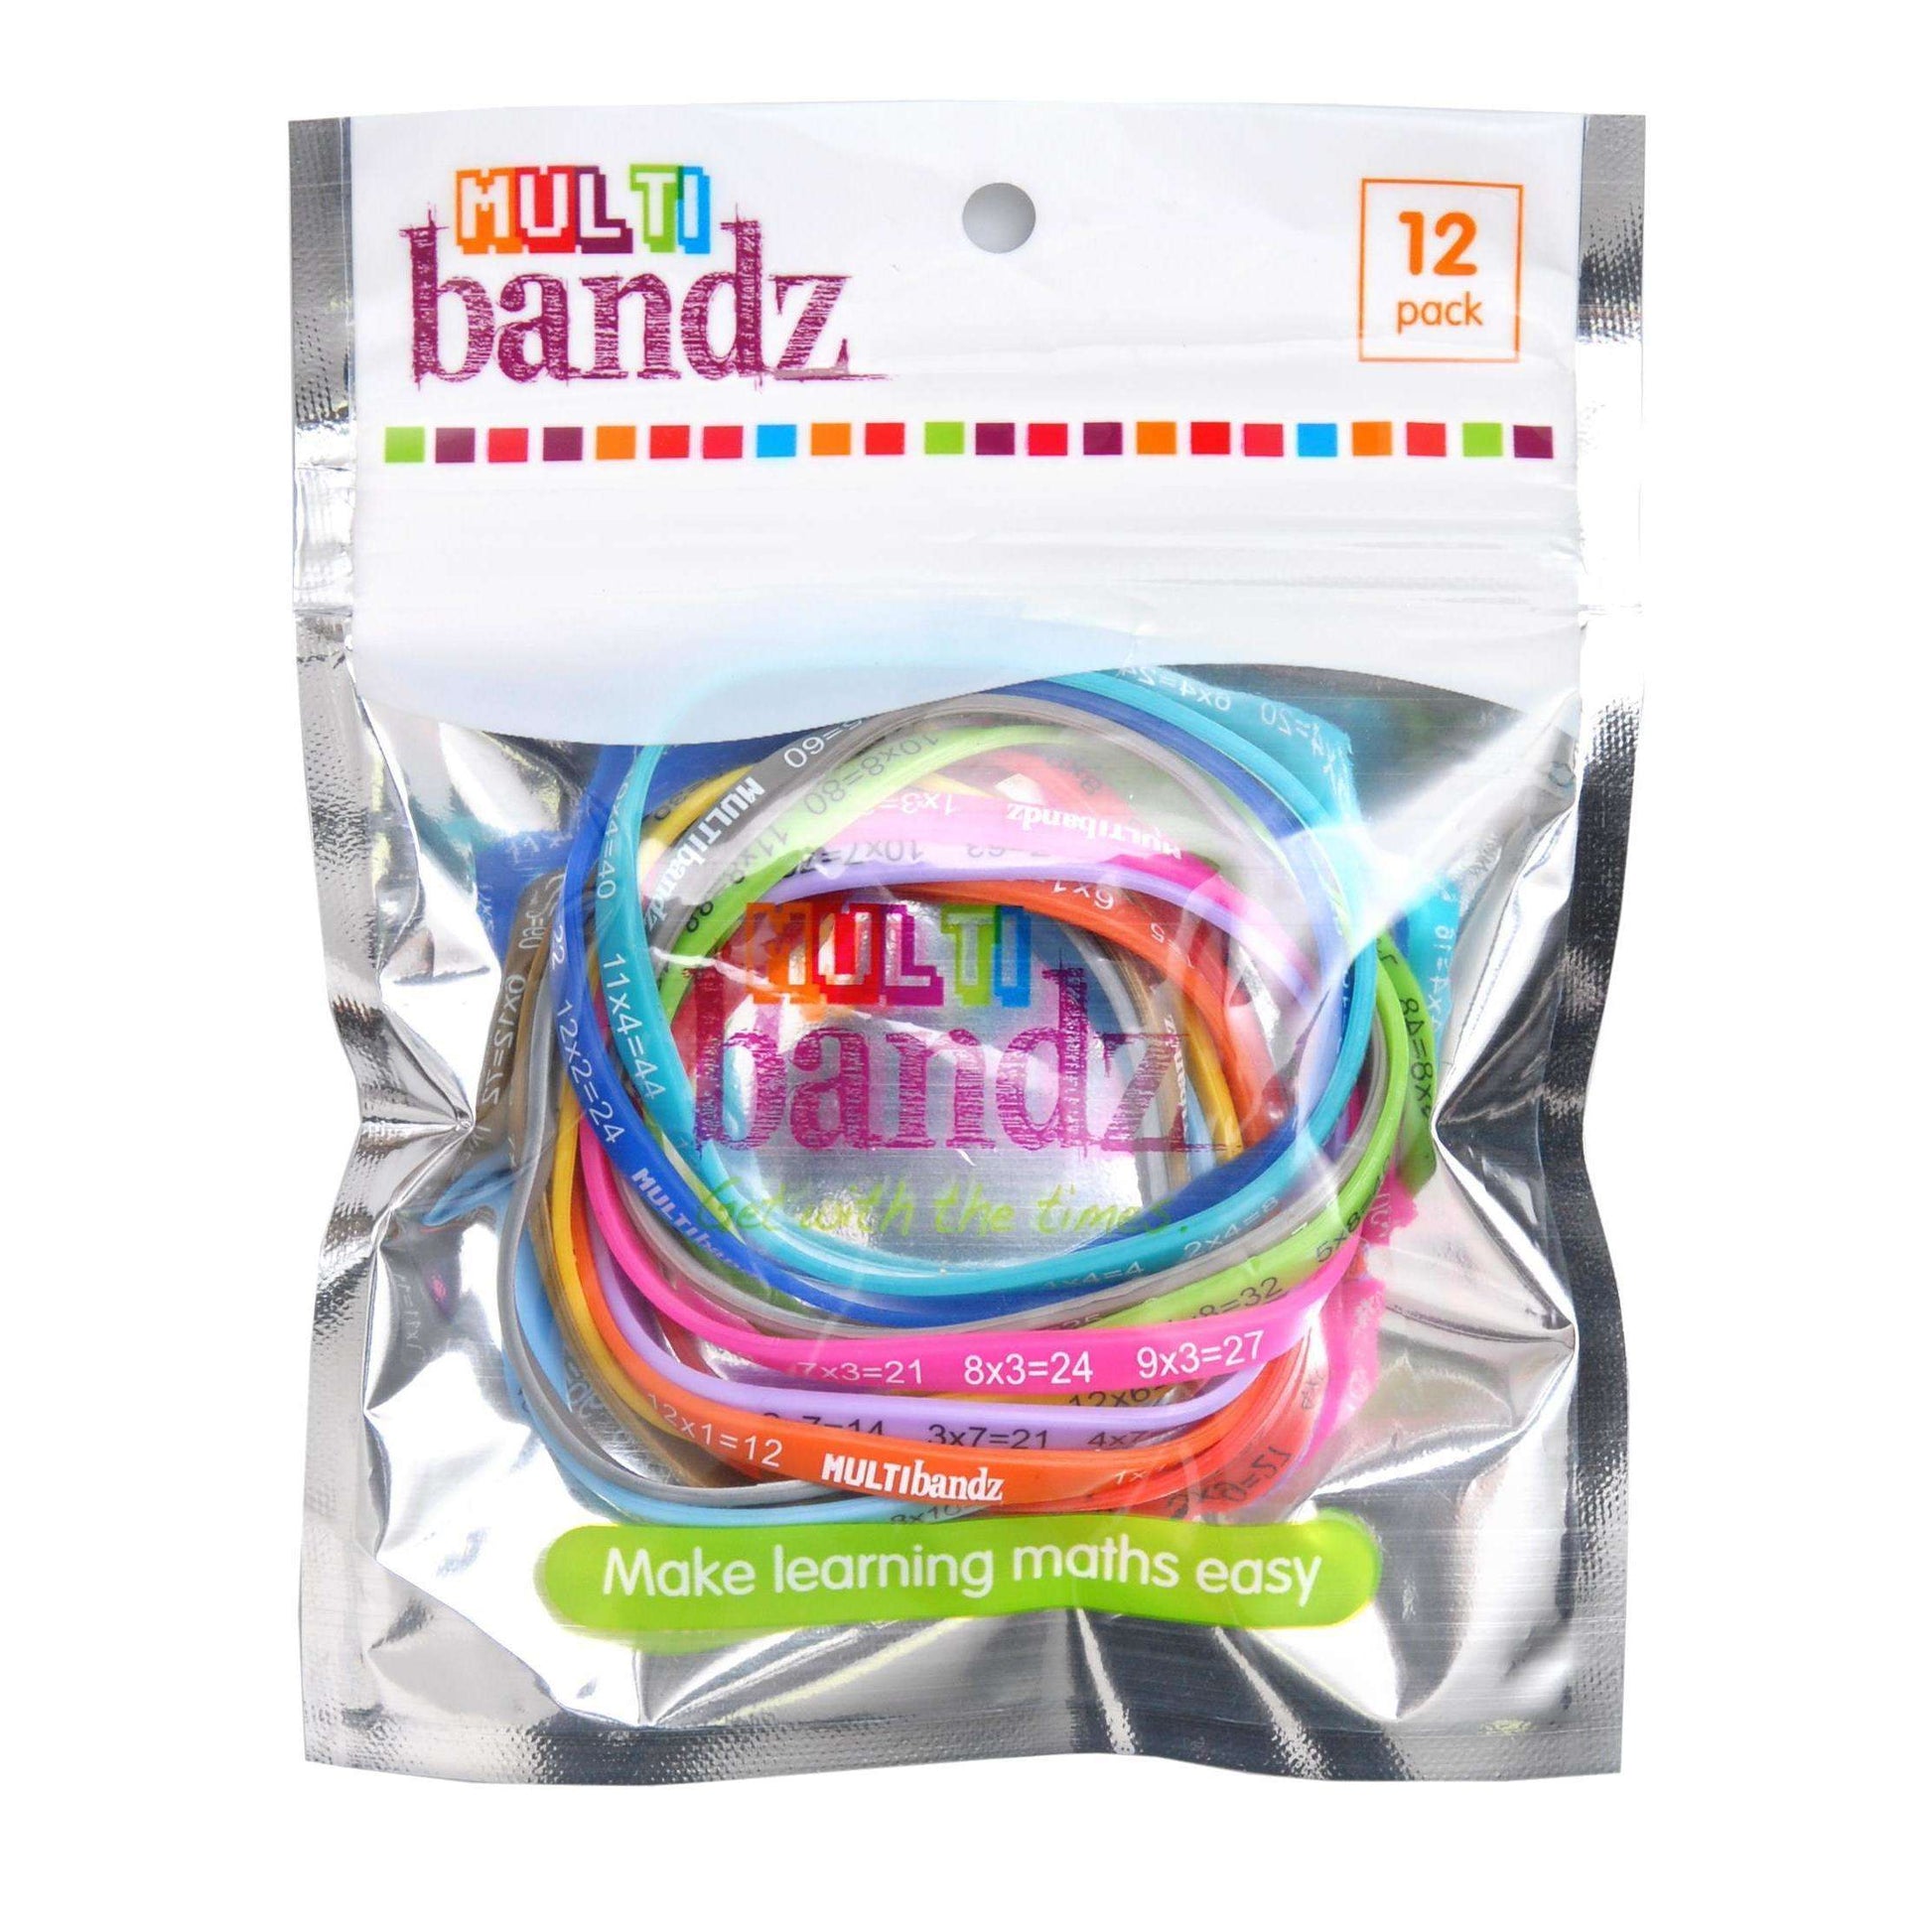 Multibandz Times Tables Learning Wristbands:Primary Classroom Resources